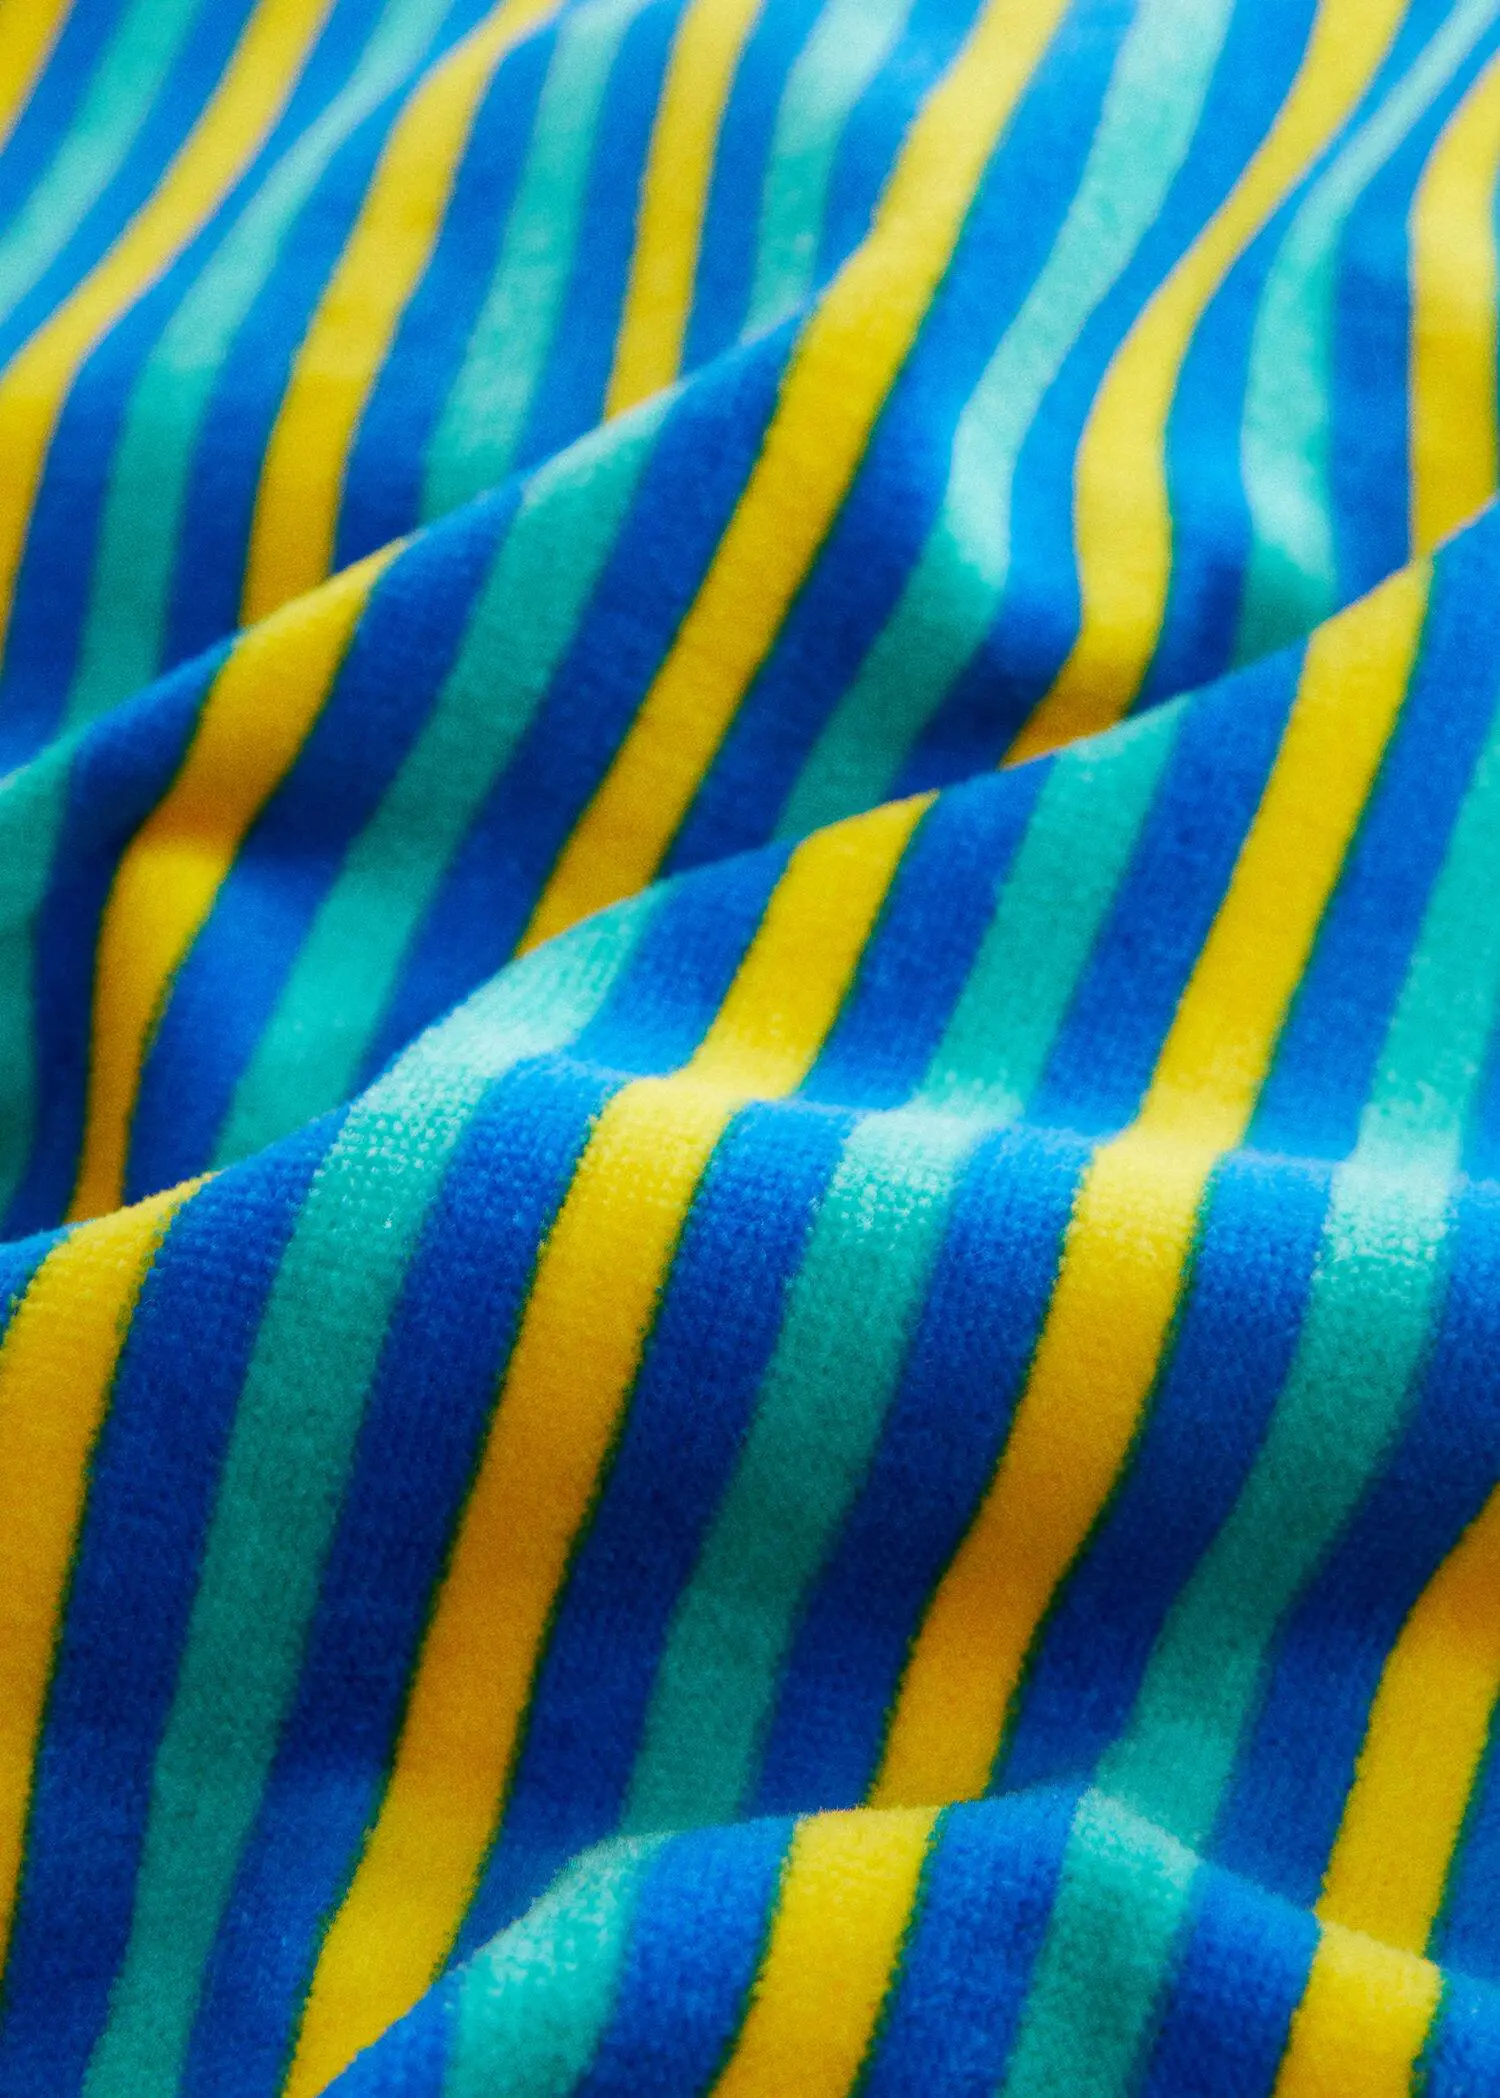 Mango Multi-coloured striped beach towel. a close-up view of a blue, yellow, and green striped fabric. 